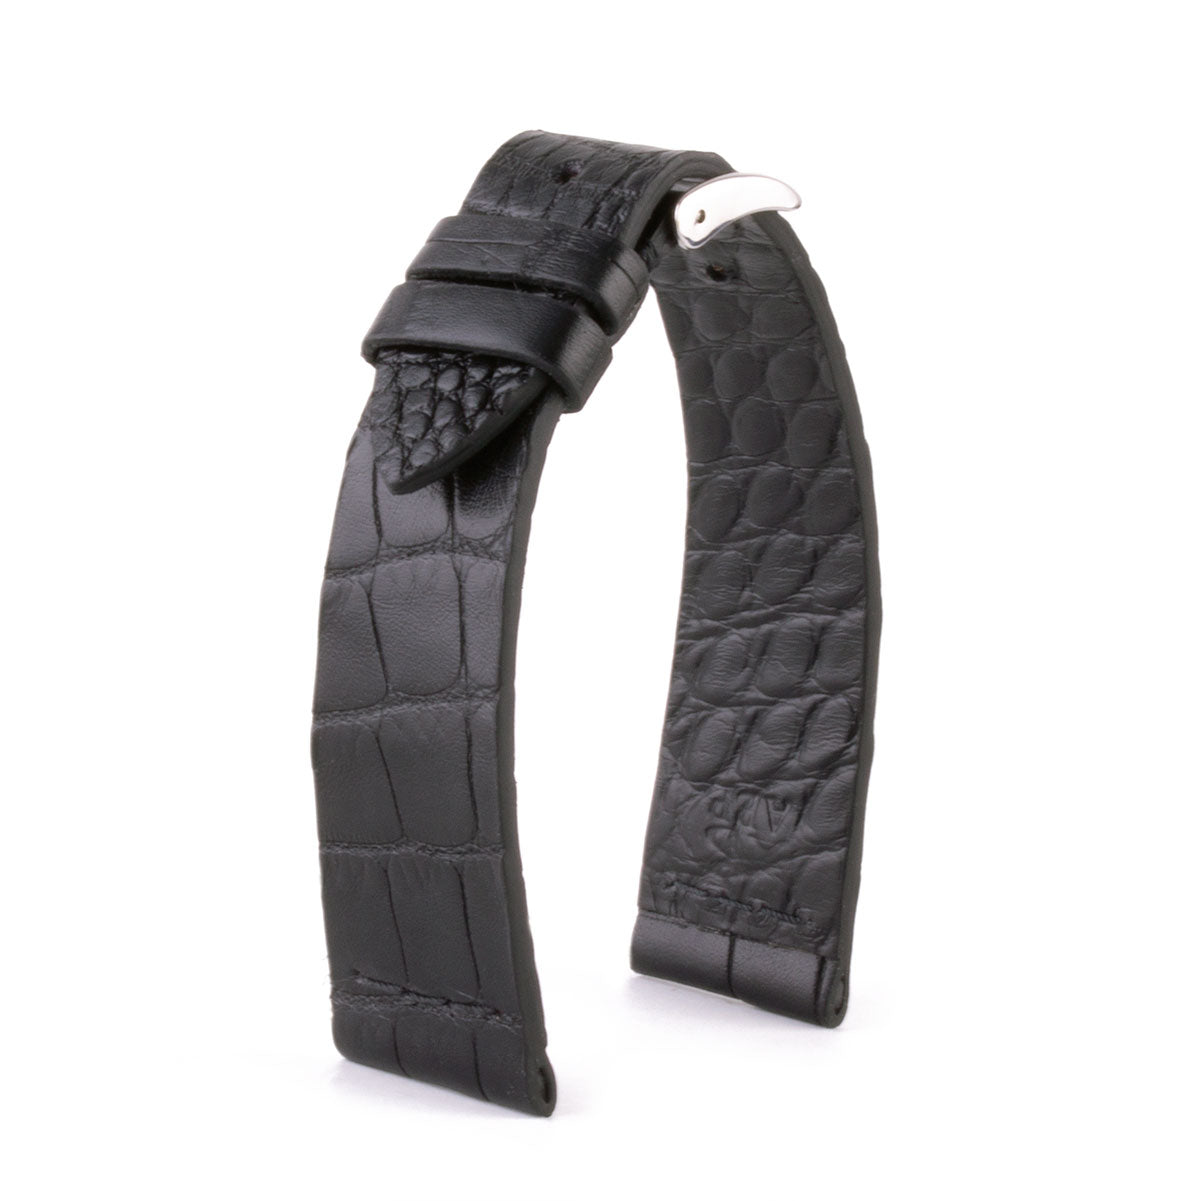 Leather watch strap - Sustainable alligator with contrasted stitching (black, blue, green, red...)